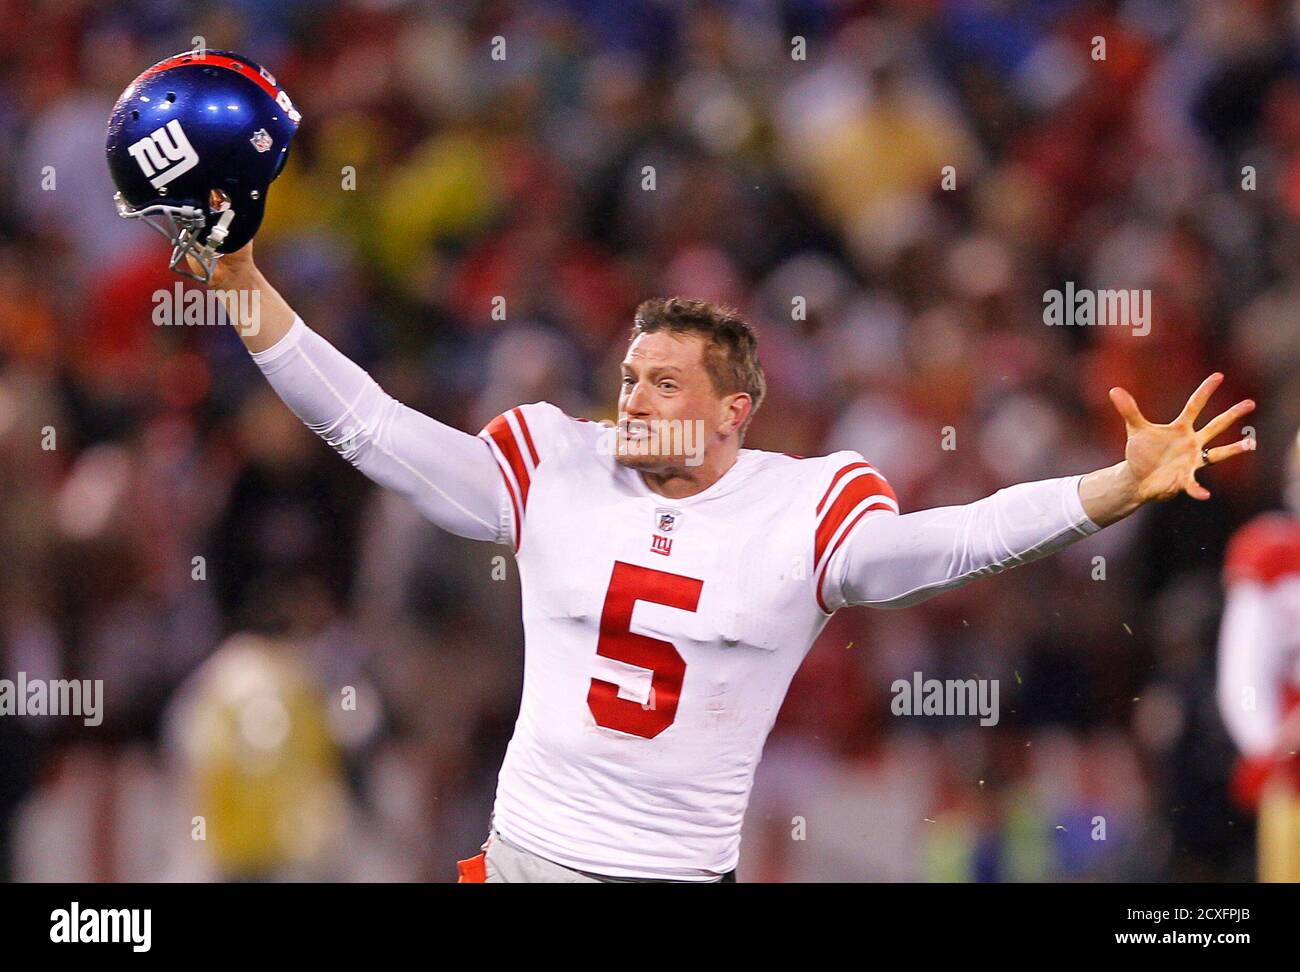 New York Giants holder Steve Weatherford celebrates after the Giants defeated the San Francisco 49ers in overtime in the NFL NFC Championship game in San Francisco, California, January 22, 2012.  REUTERS/Mike Blake (UNITED STATES  - Tags: SPORT FOOTBALL) Stock Photo